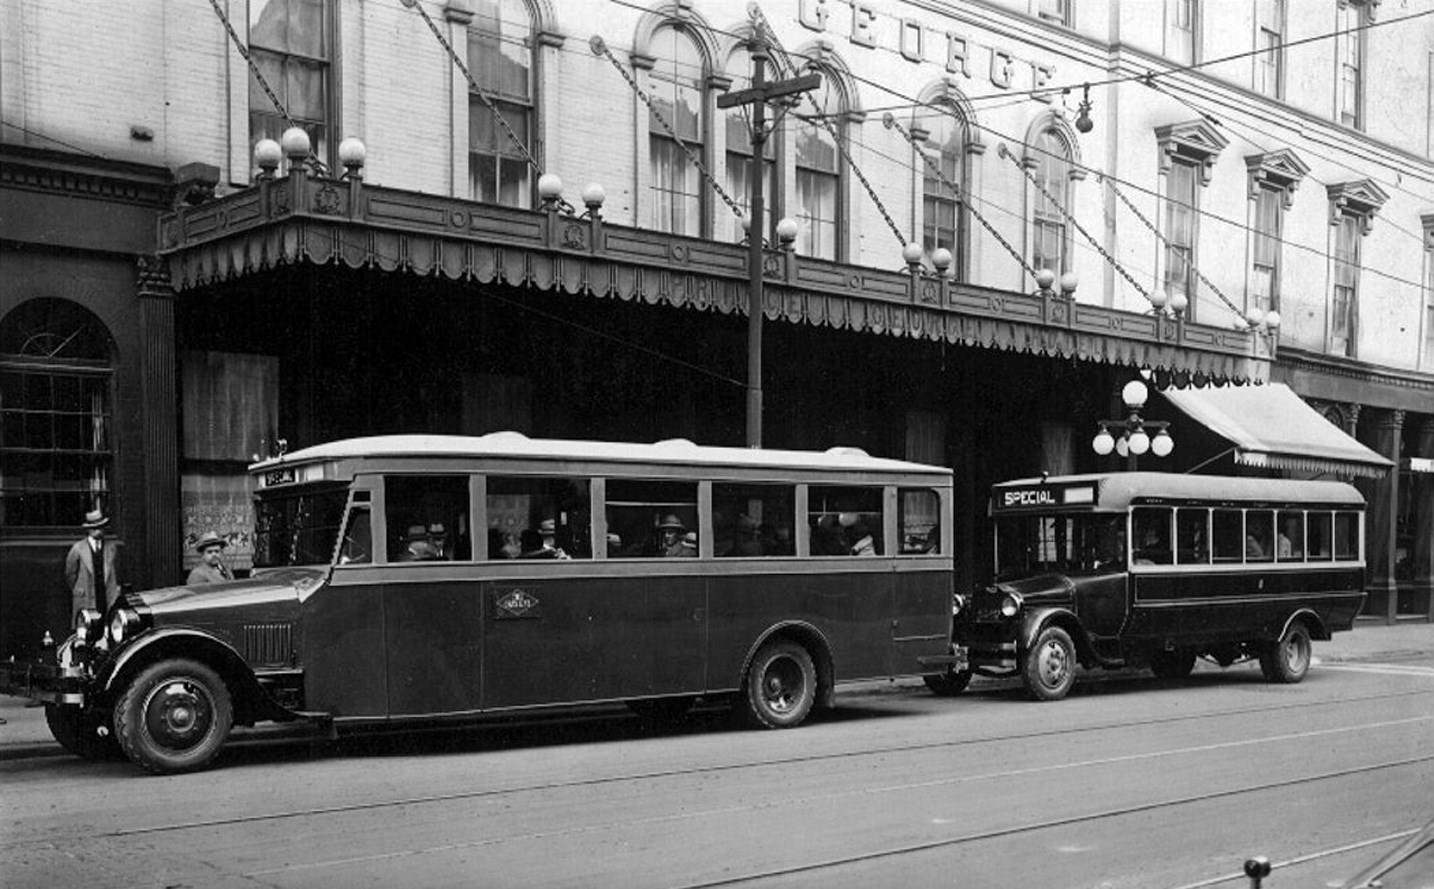 Gray Line sightseeing coach & bus no. 26 at the Prince George Hotel, corner of King & York Streets. Hotel originally opened in 1857 as the Rossin House Hotel, was renamed in 1909